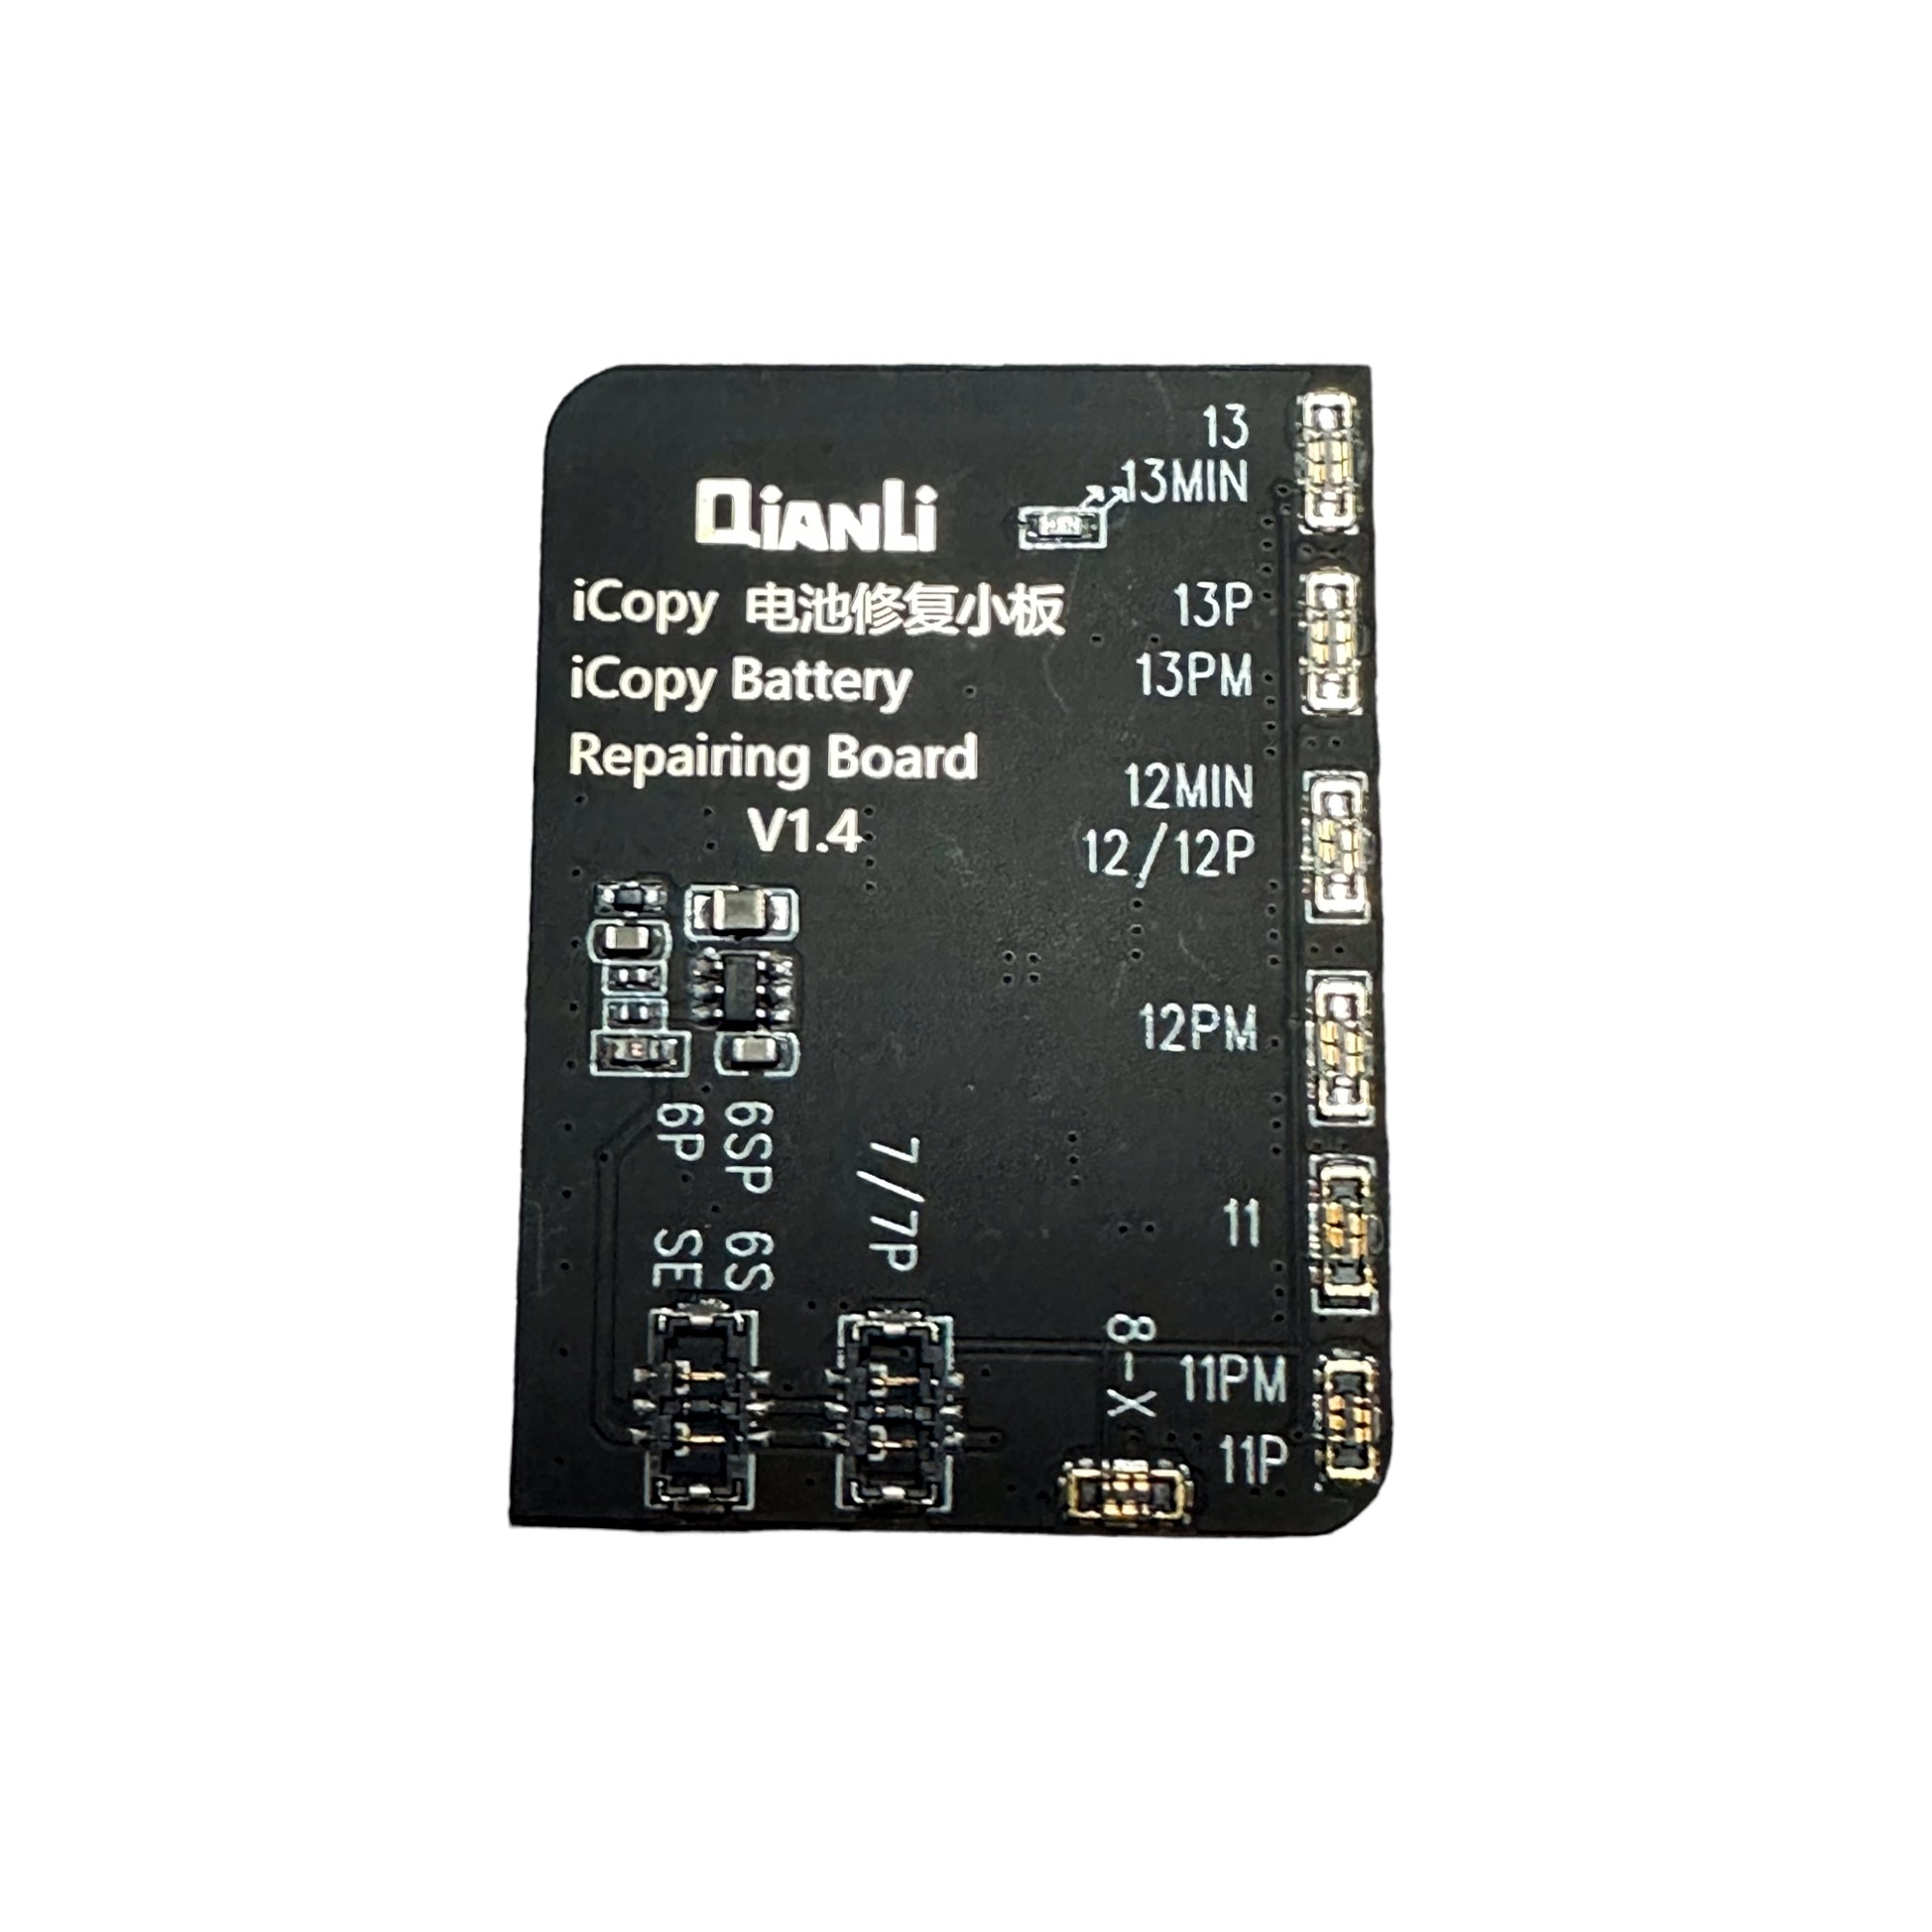 Qianli iCopy Plus 2.2v with Battery Testing LCD Vibrator Transfer EEPROM Programmer With 3 Boards